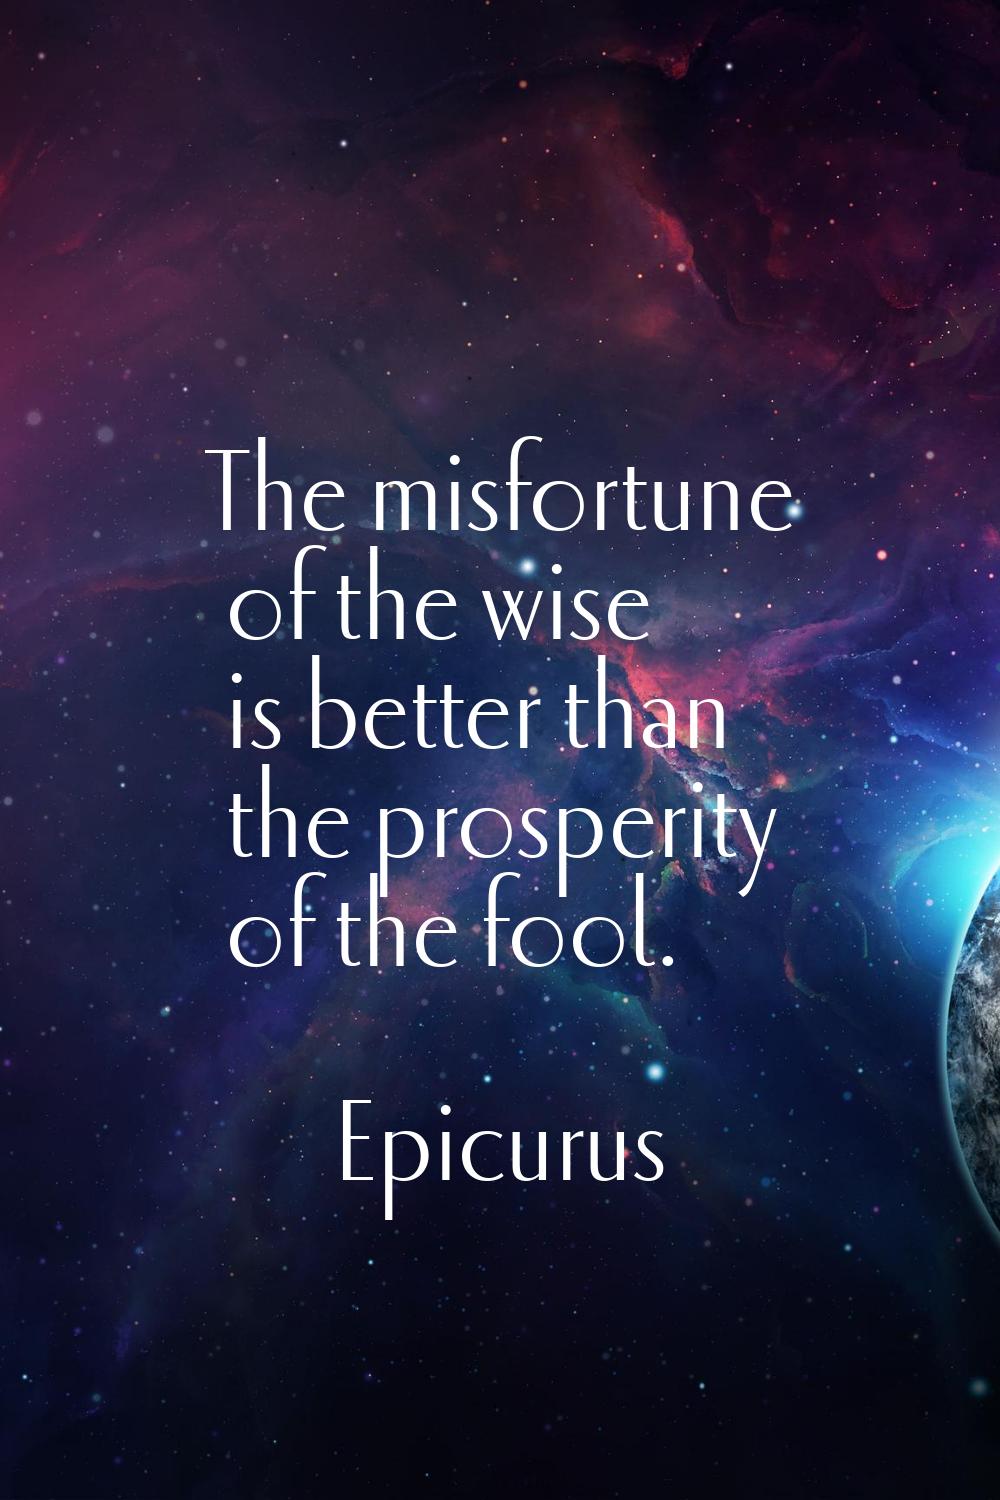 The misfortune of the wise is better than the prosperity of the fool.